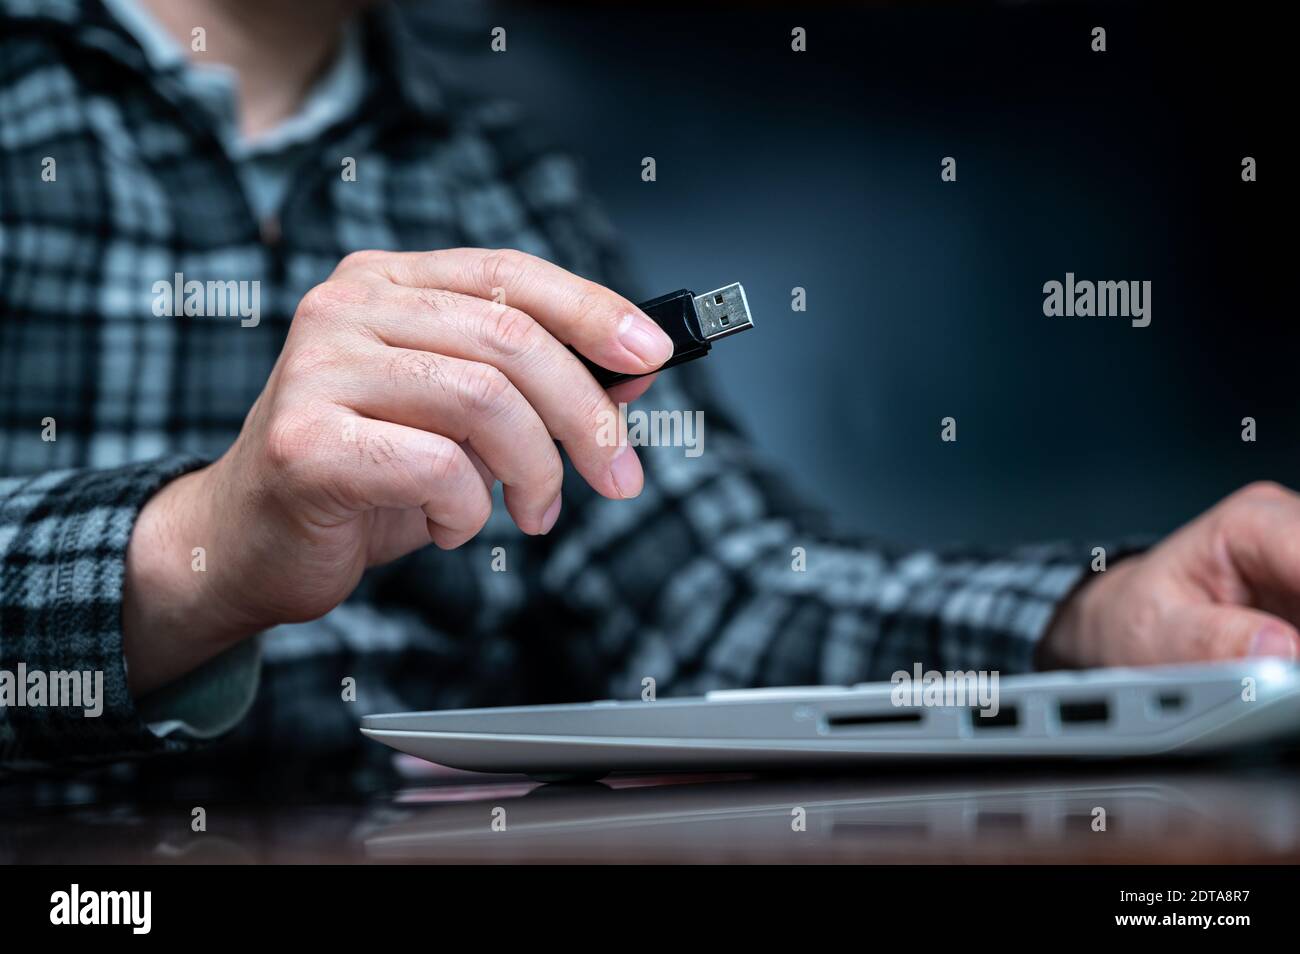 The hand of a person using a USB memory. Cyber Information Protection Concept. USB Selection Focus. Stock Photo